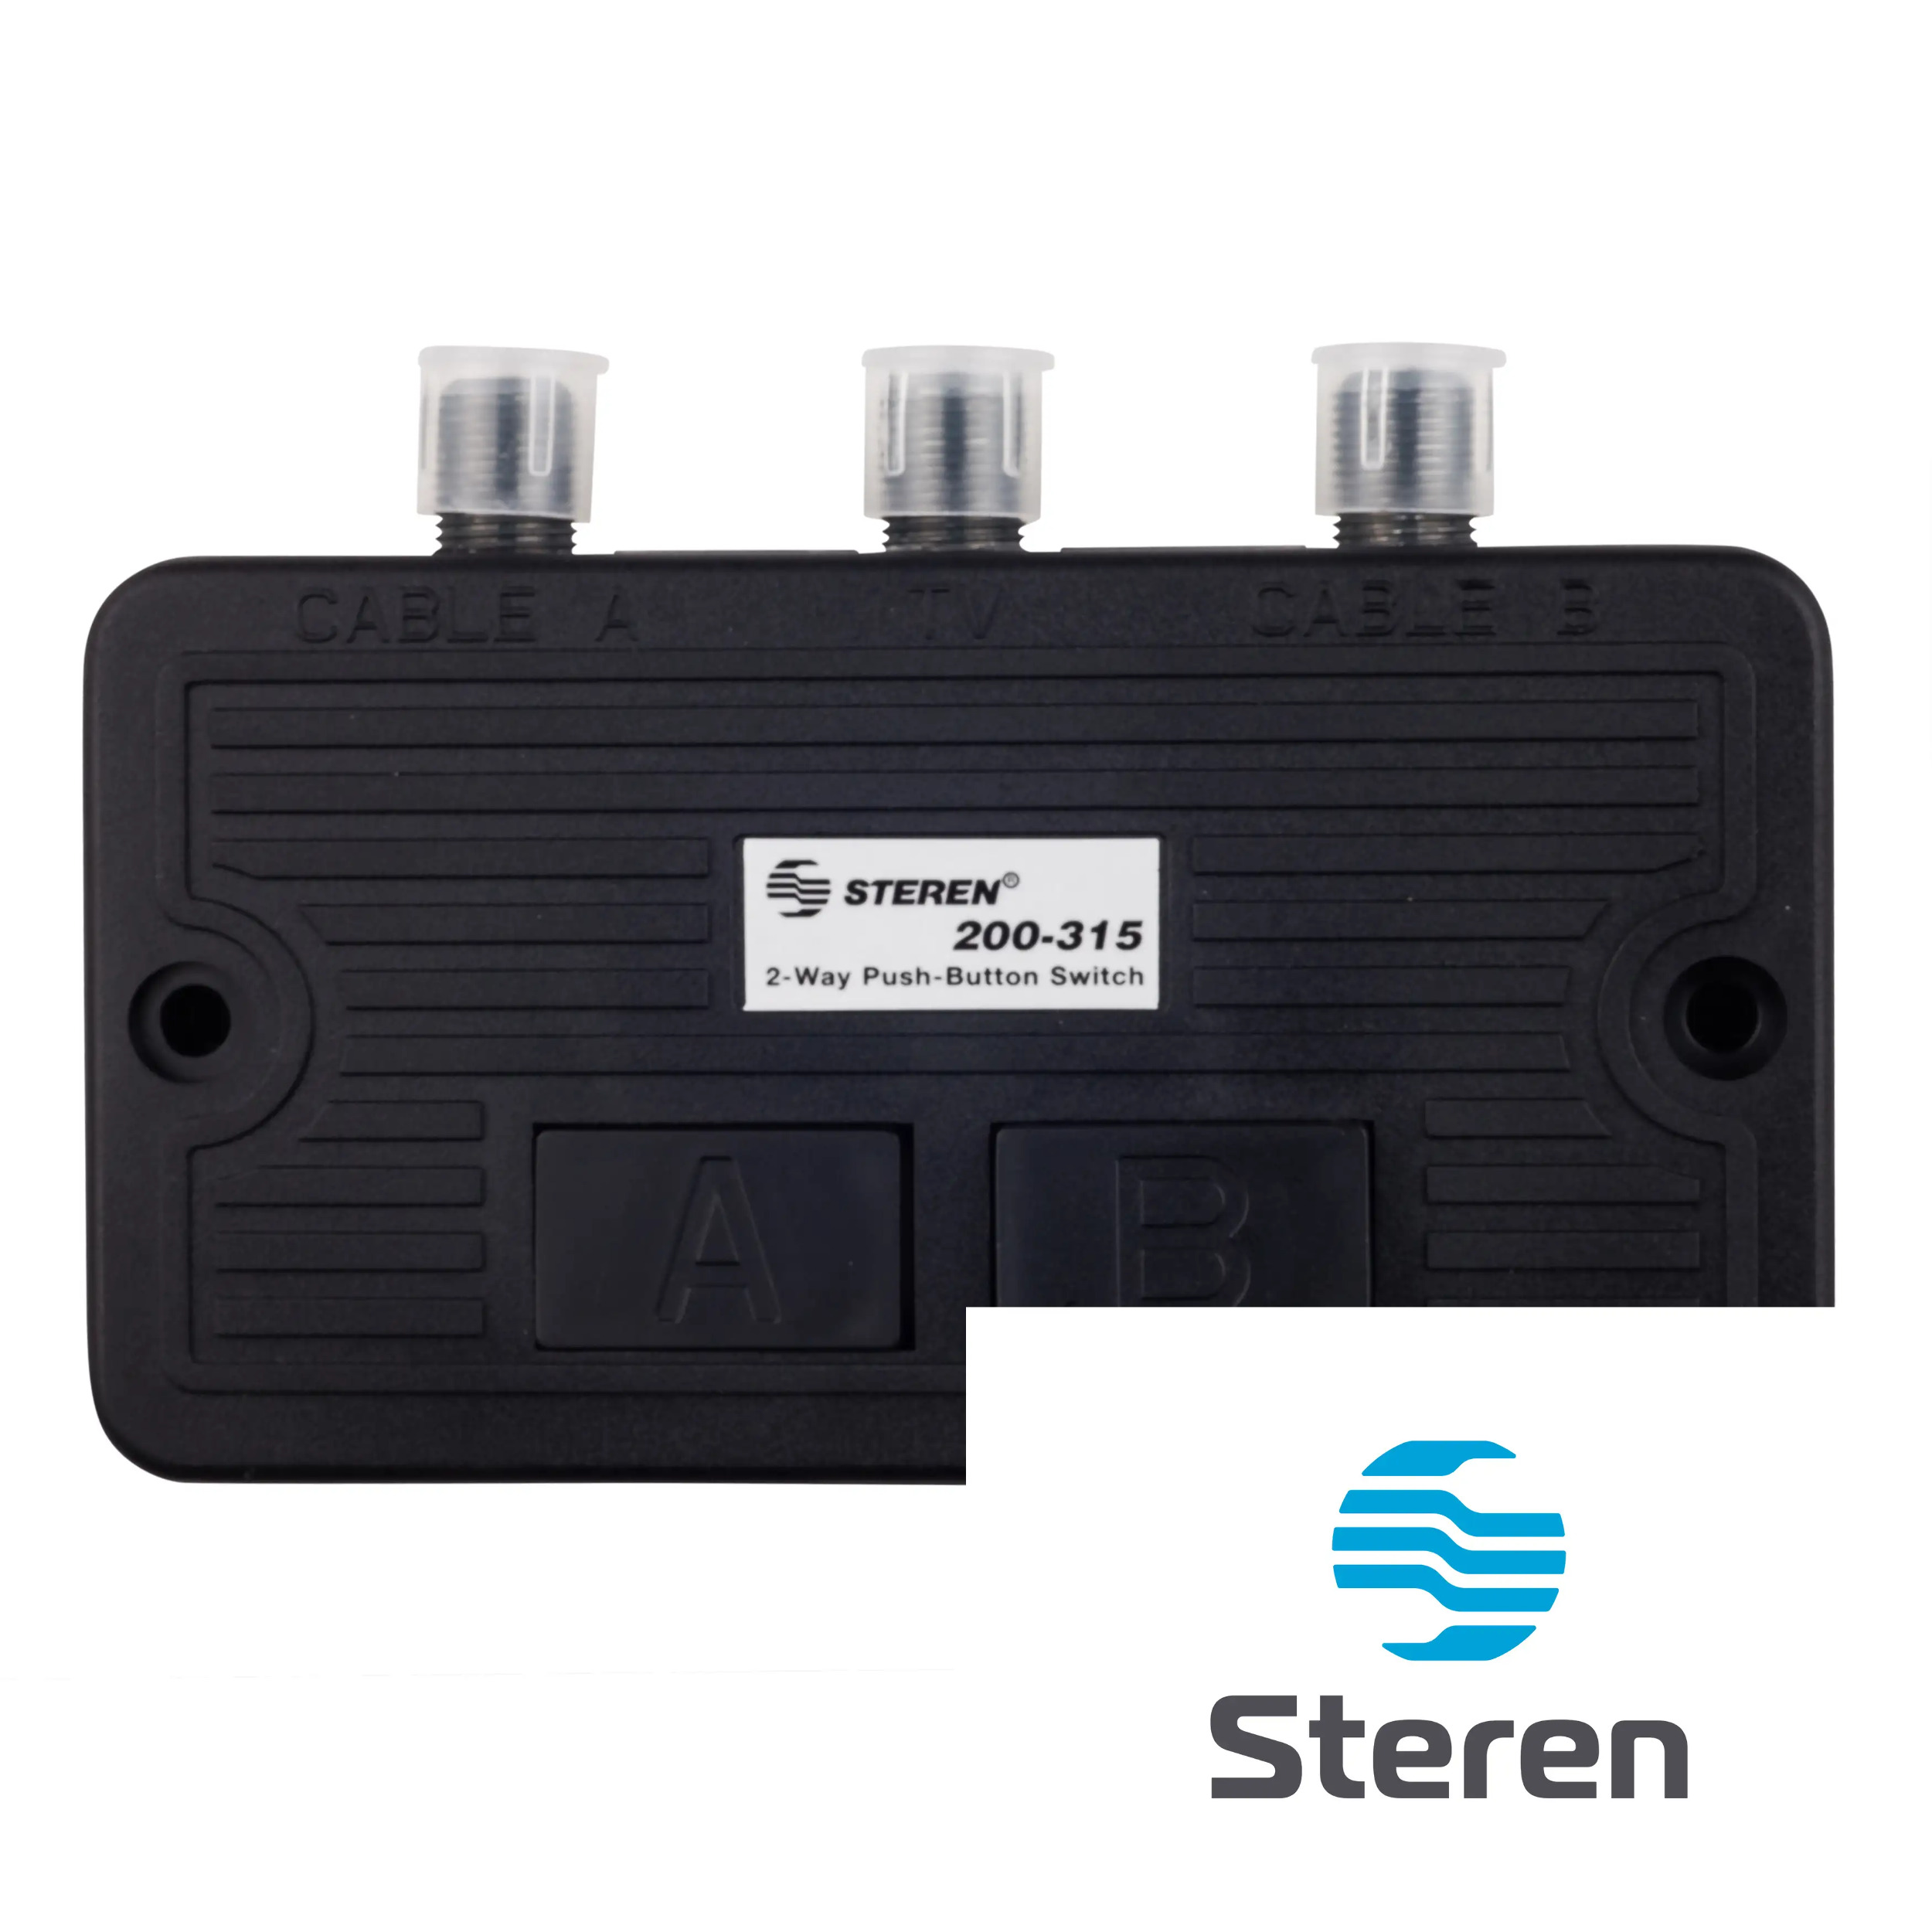 Steren 2-Way Coaxial A/B Push-Button Switch for TV, Antenna Splitter - 200-315 - image 4 of 4